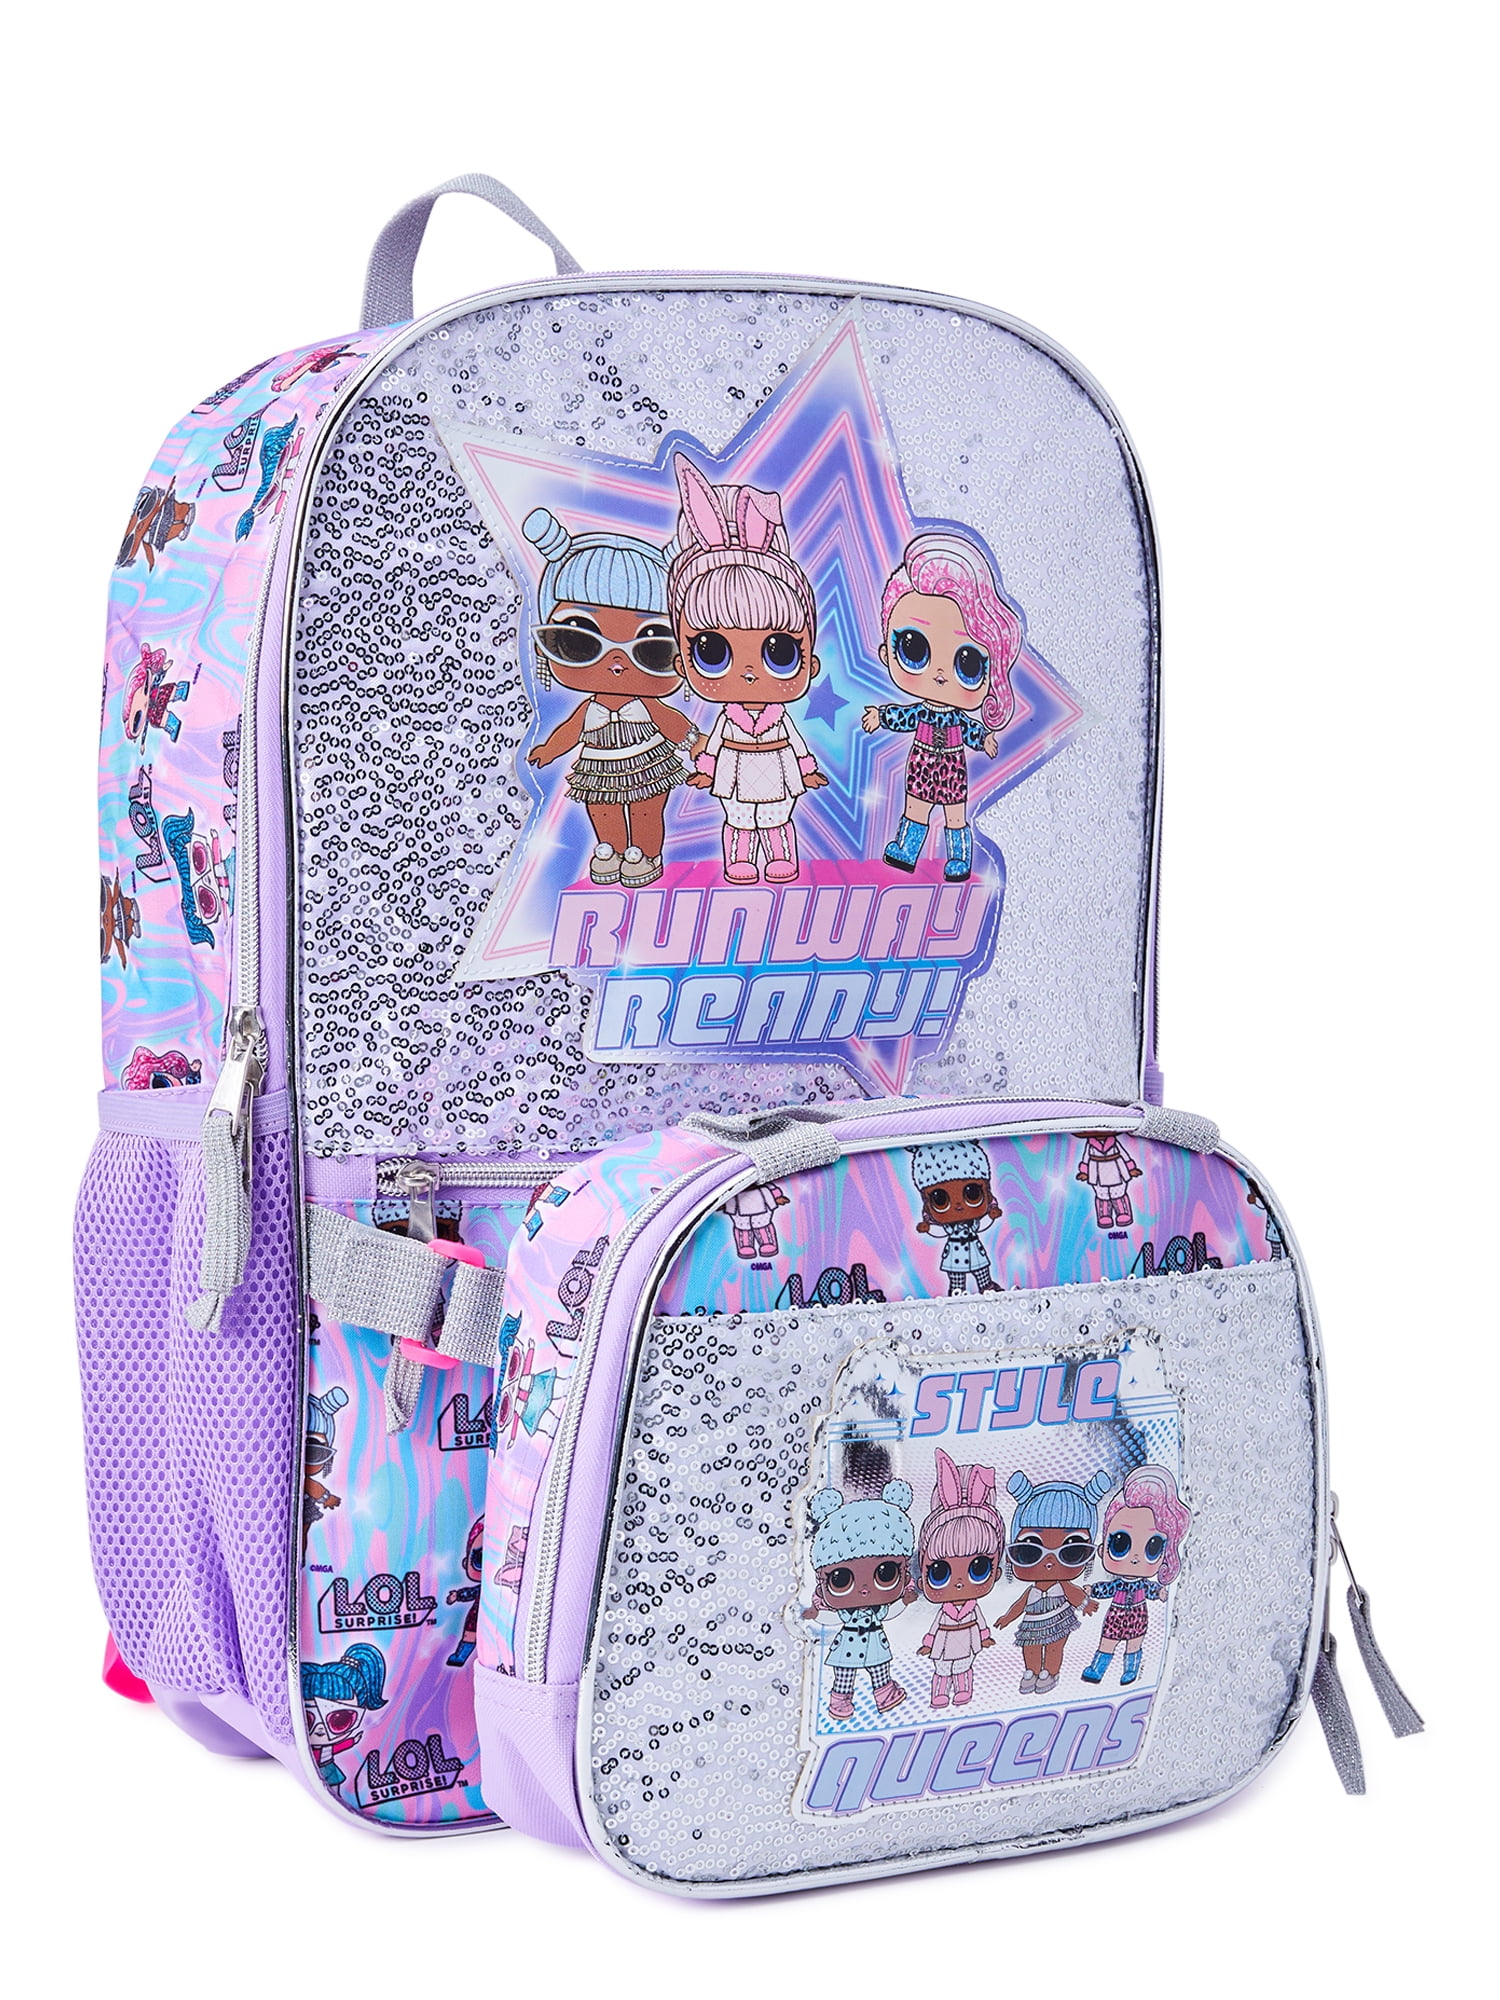 L O L Surprise Runway Ready Girls 17 Laptop Backpack 2 Piece Set with Lunch Tote Bag Silver Purple 2c0f1649 258e 4606 a8e6 6b19382473b2.c90b37ae138376d362acb77b609933f2